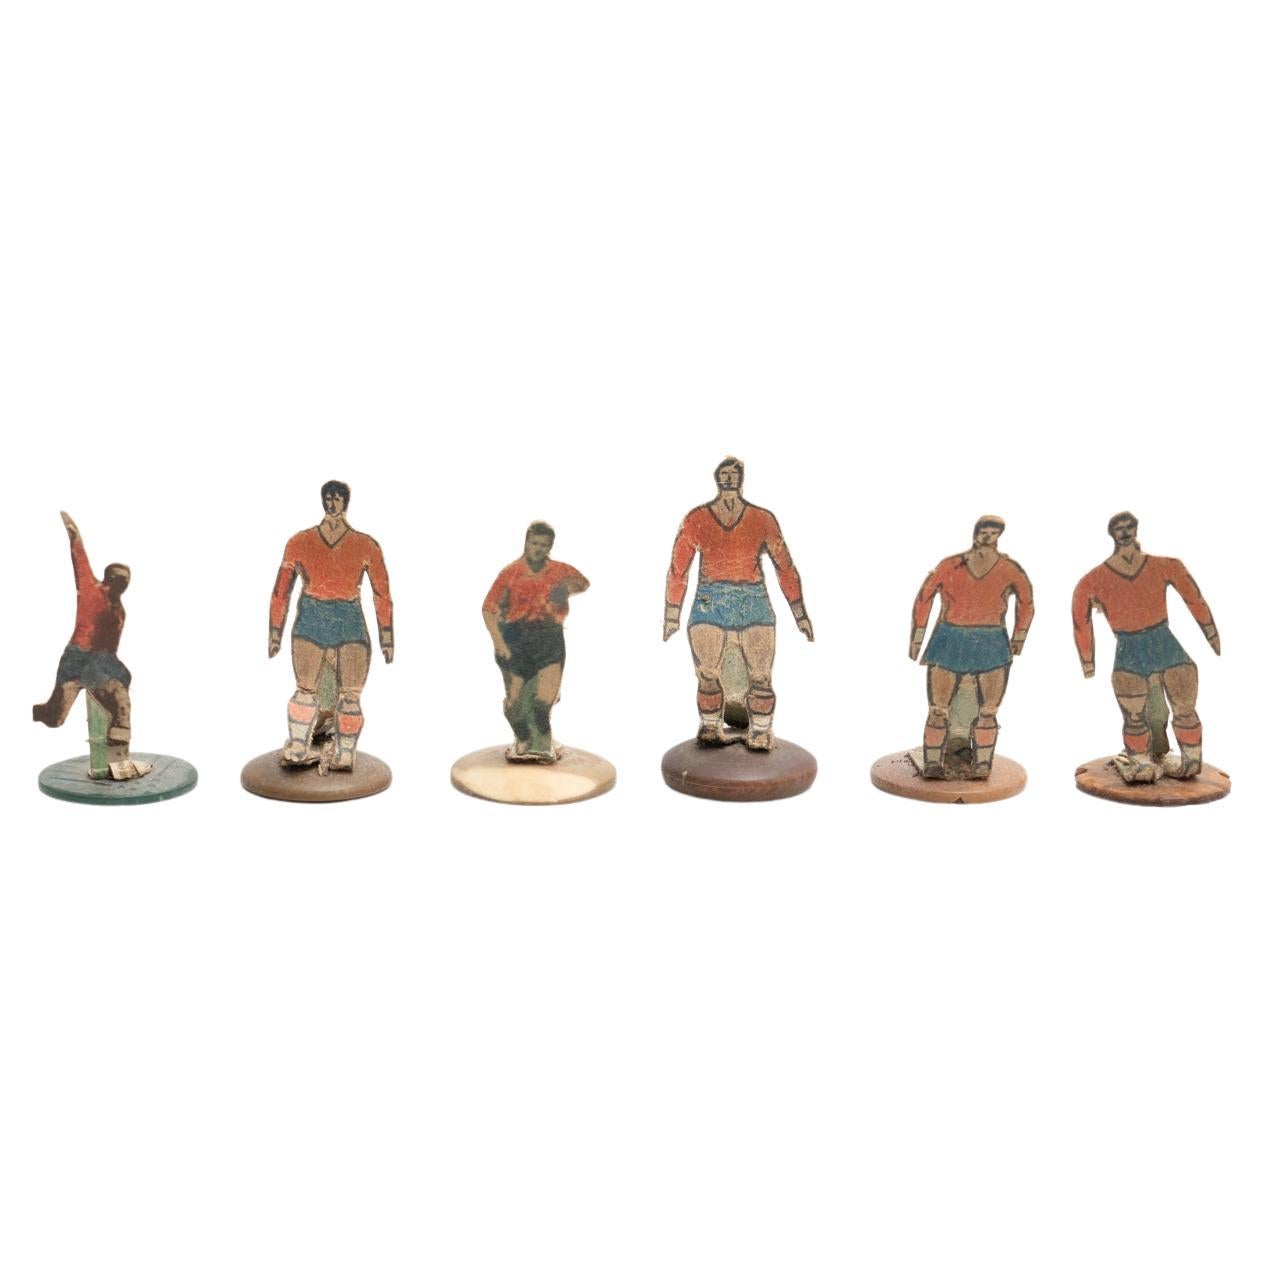 Set of 6 Traditional Antique Button Soccer Game Figures, circa 1950 For Sale